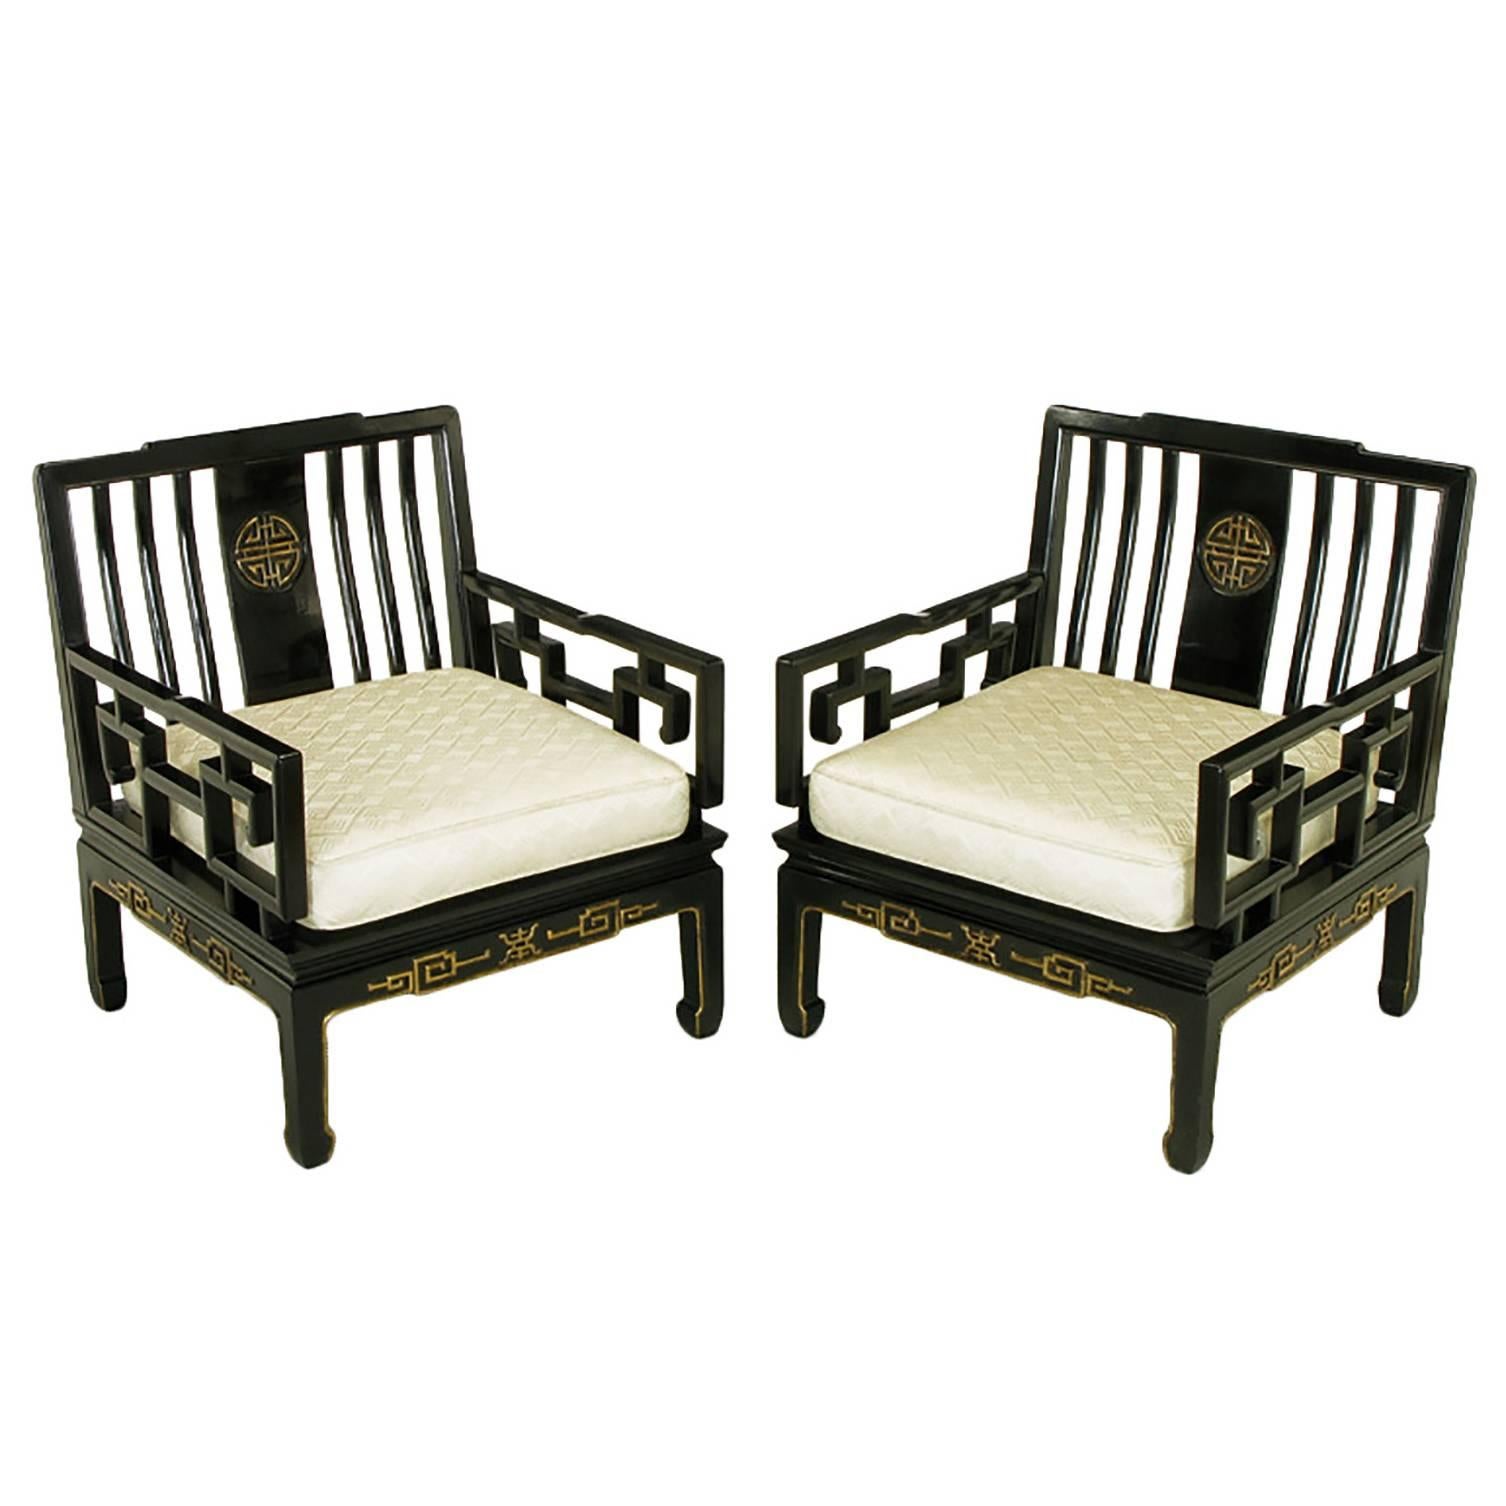 Pair of Ebonized and Parcel-Gilt Asian Club Chairs